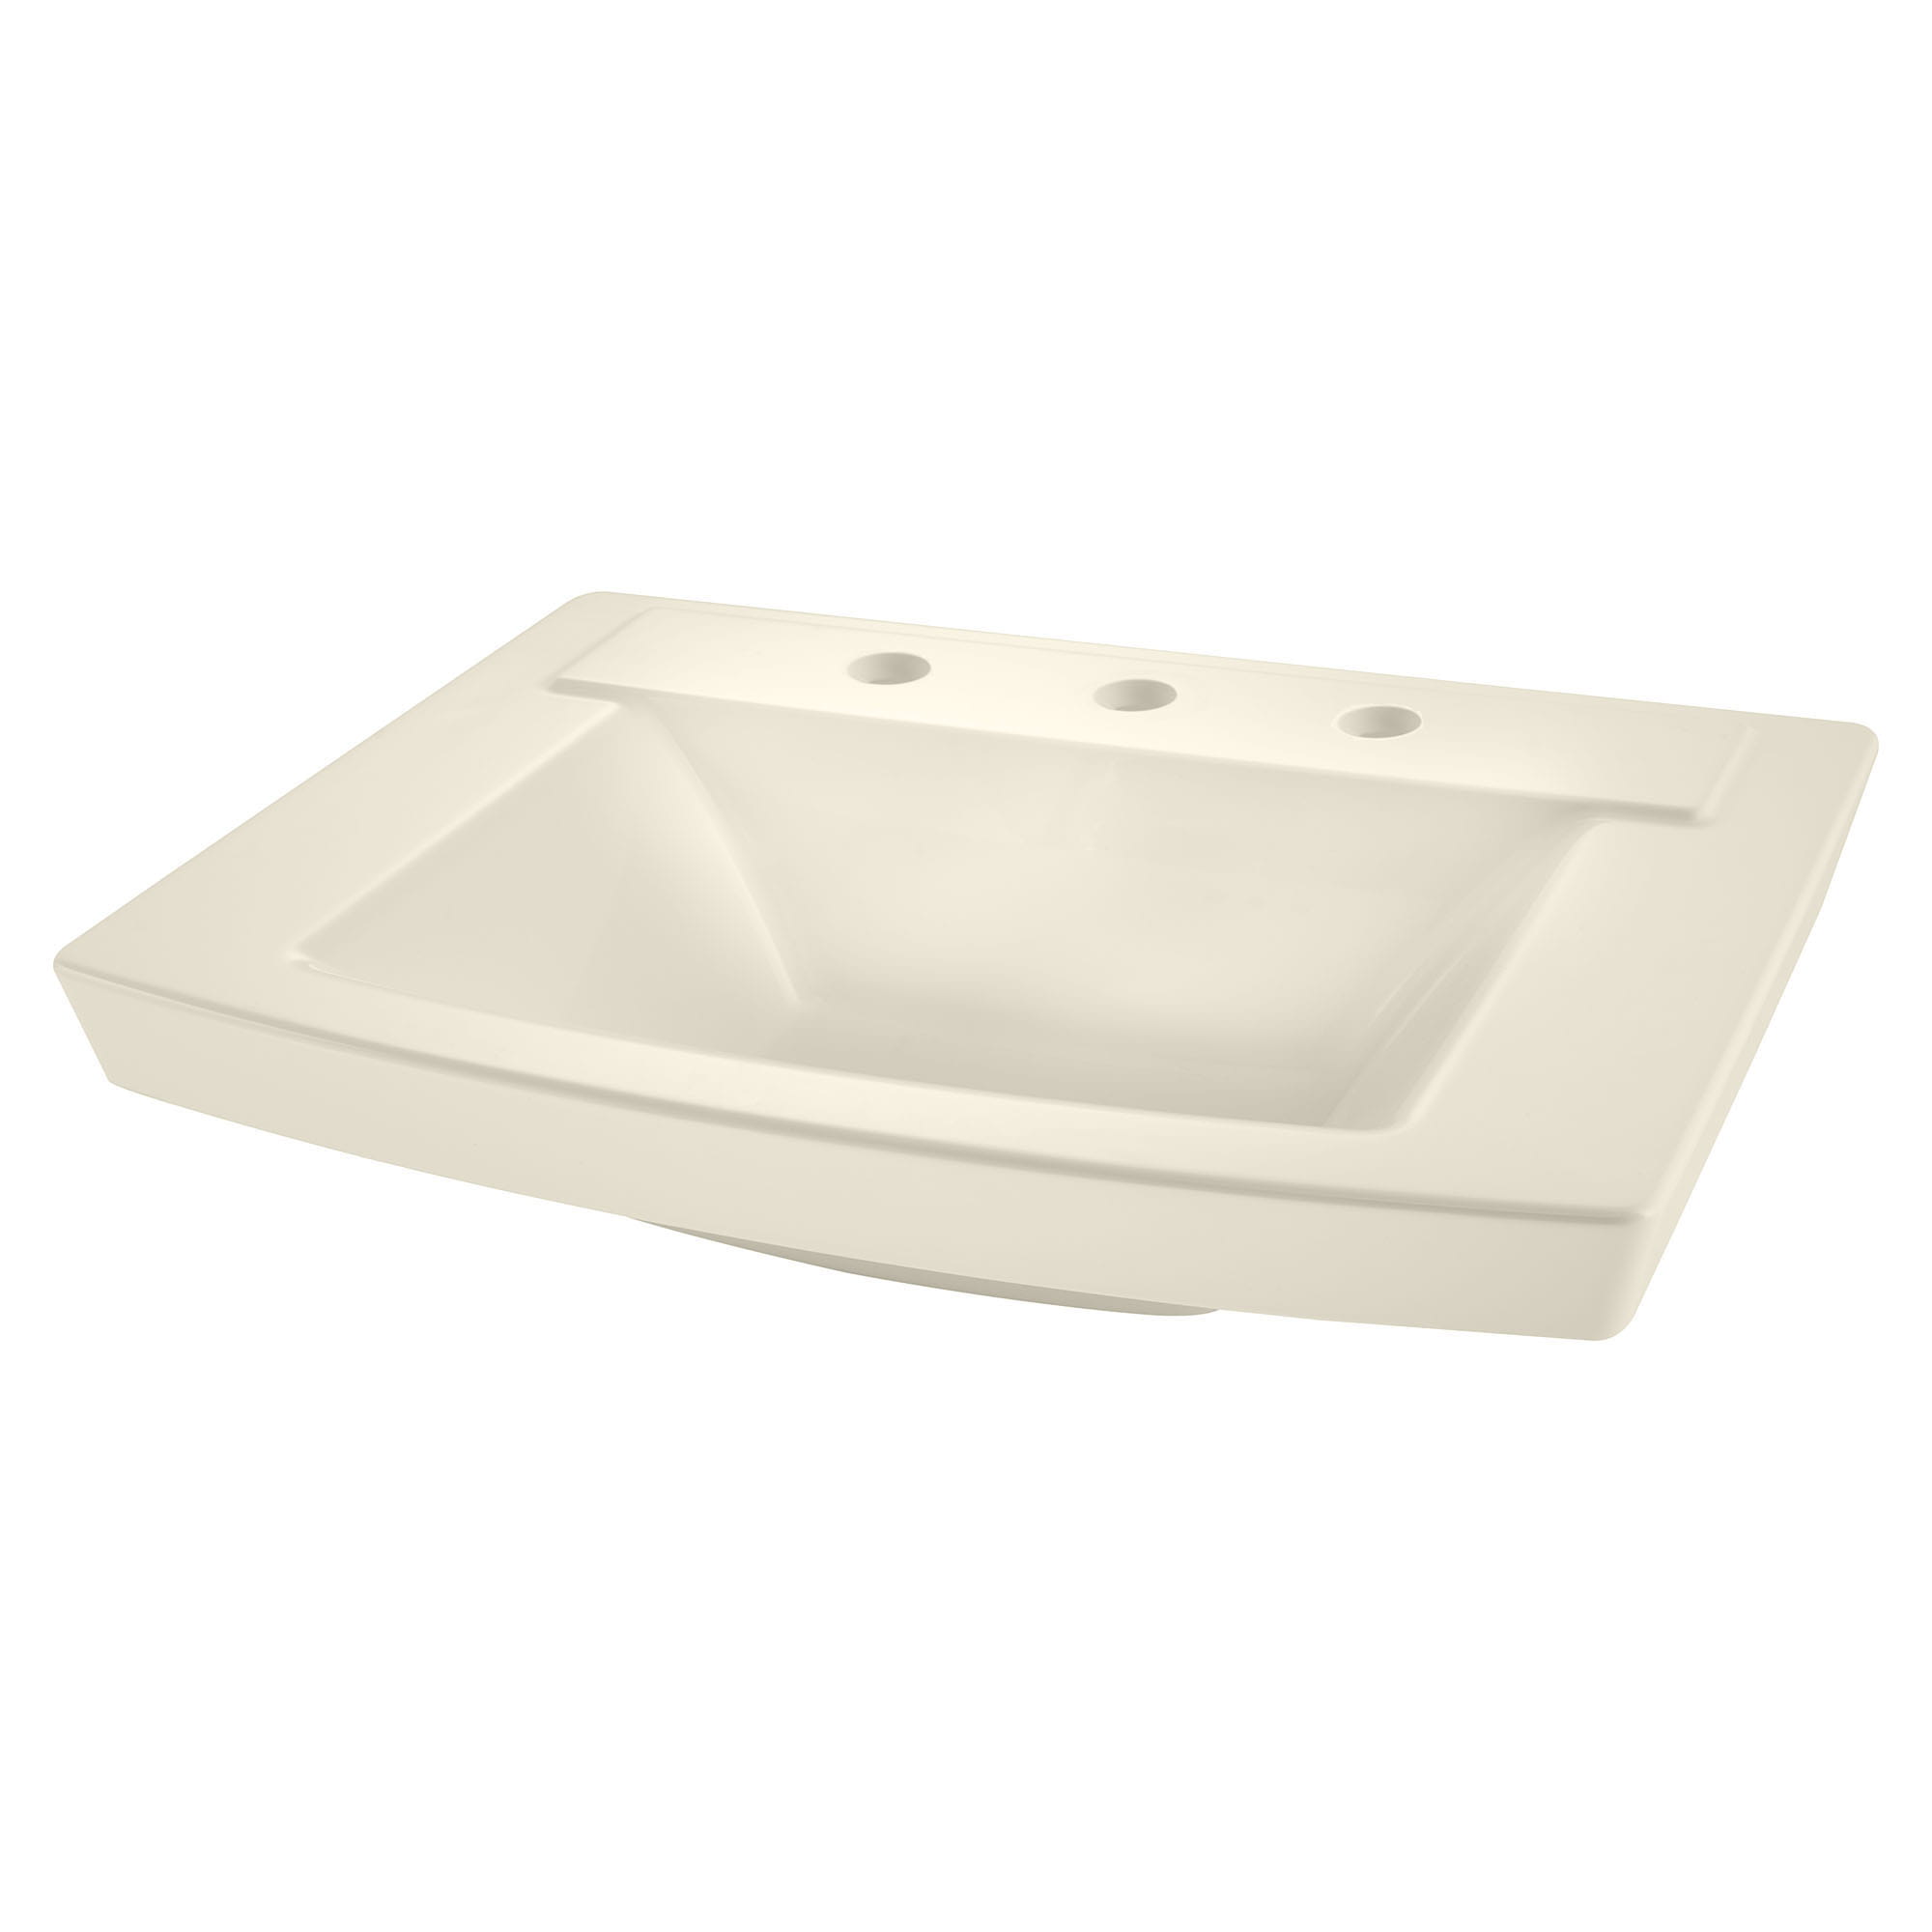 Townsend 24 x 18 Inch Above Counter Sink With 8 Inch Widespread LINEN